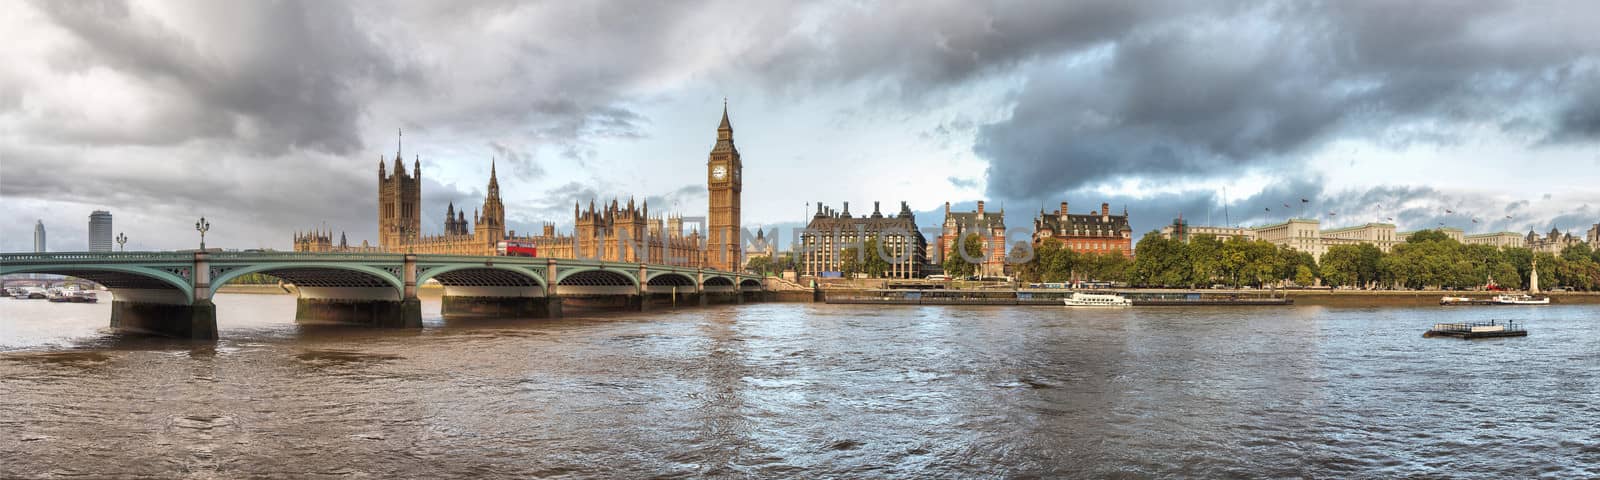 Houses of Parliament London HDR by claudiodivizia